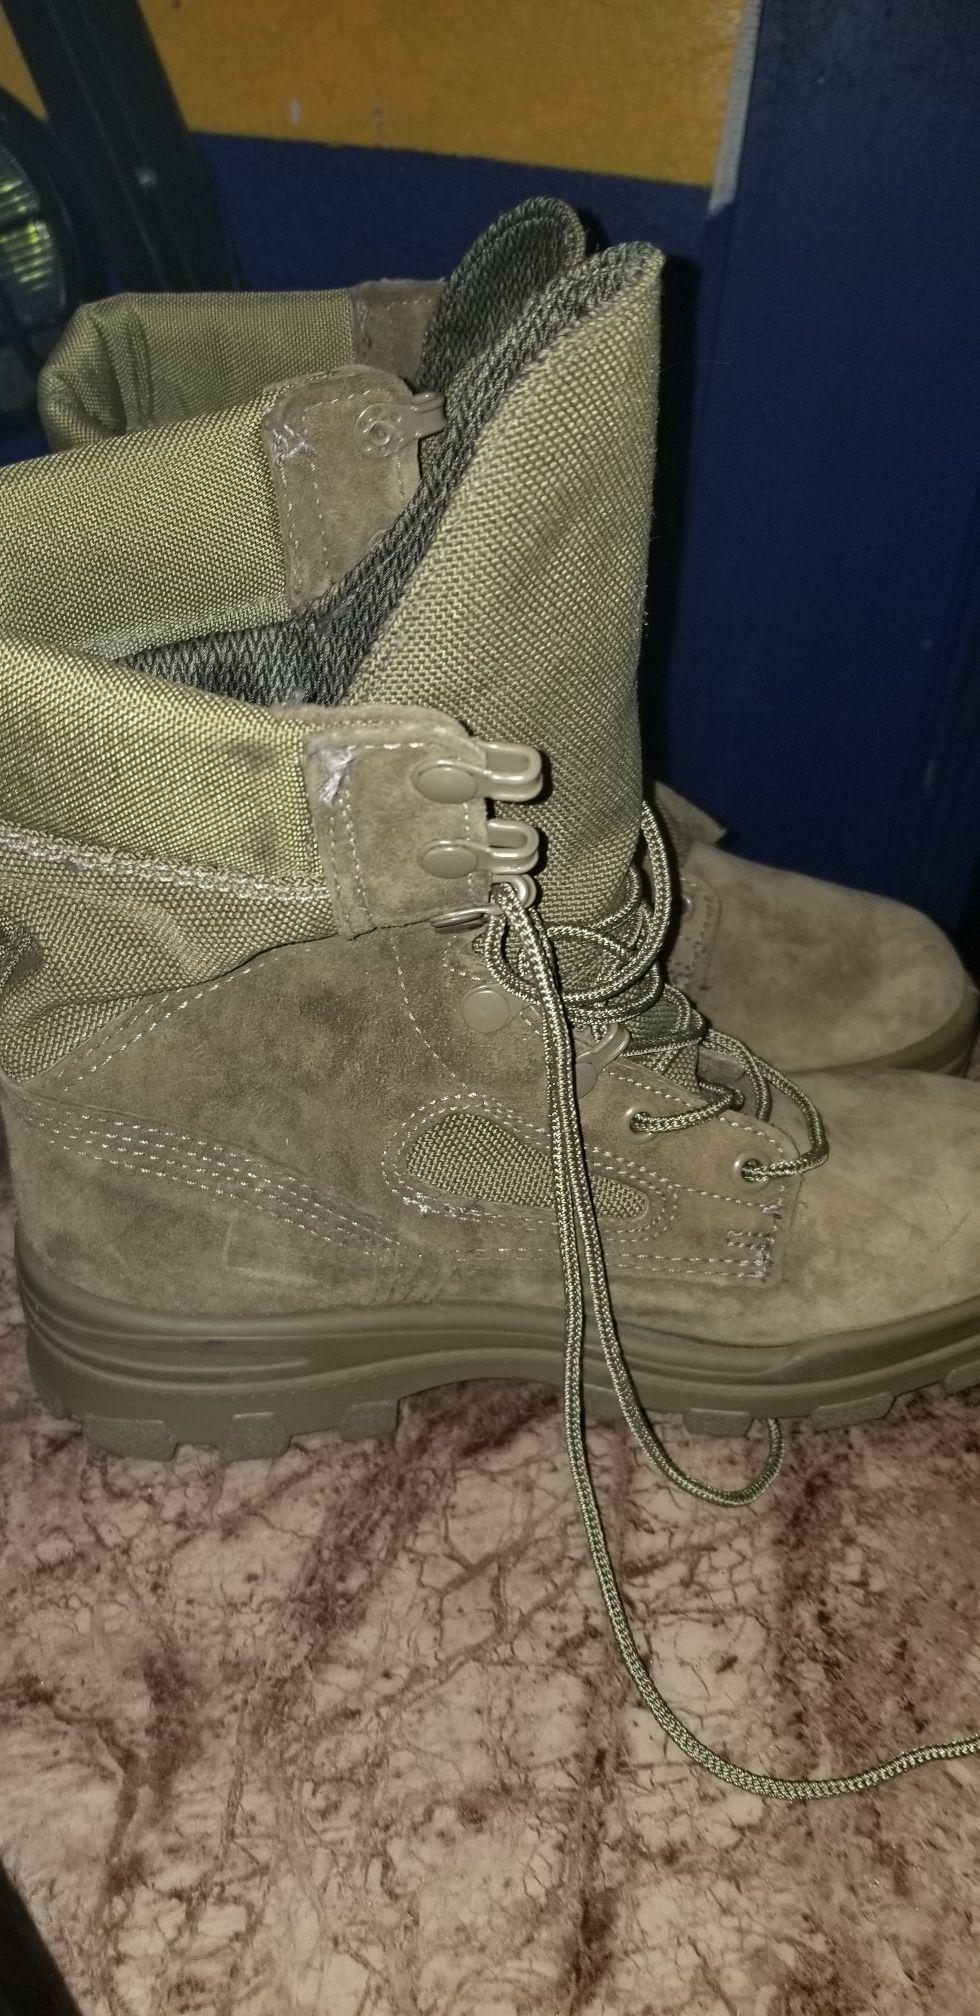 Bates military style boots